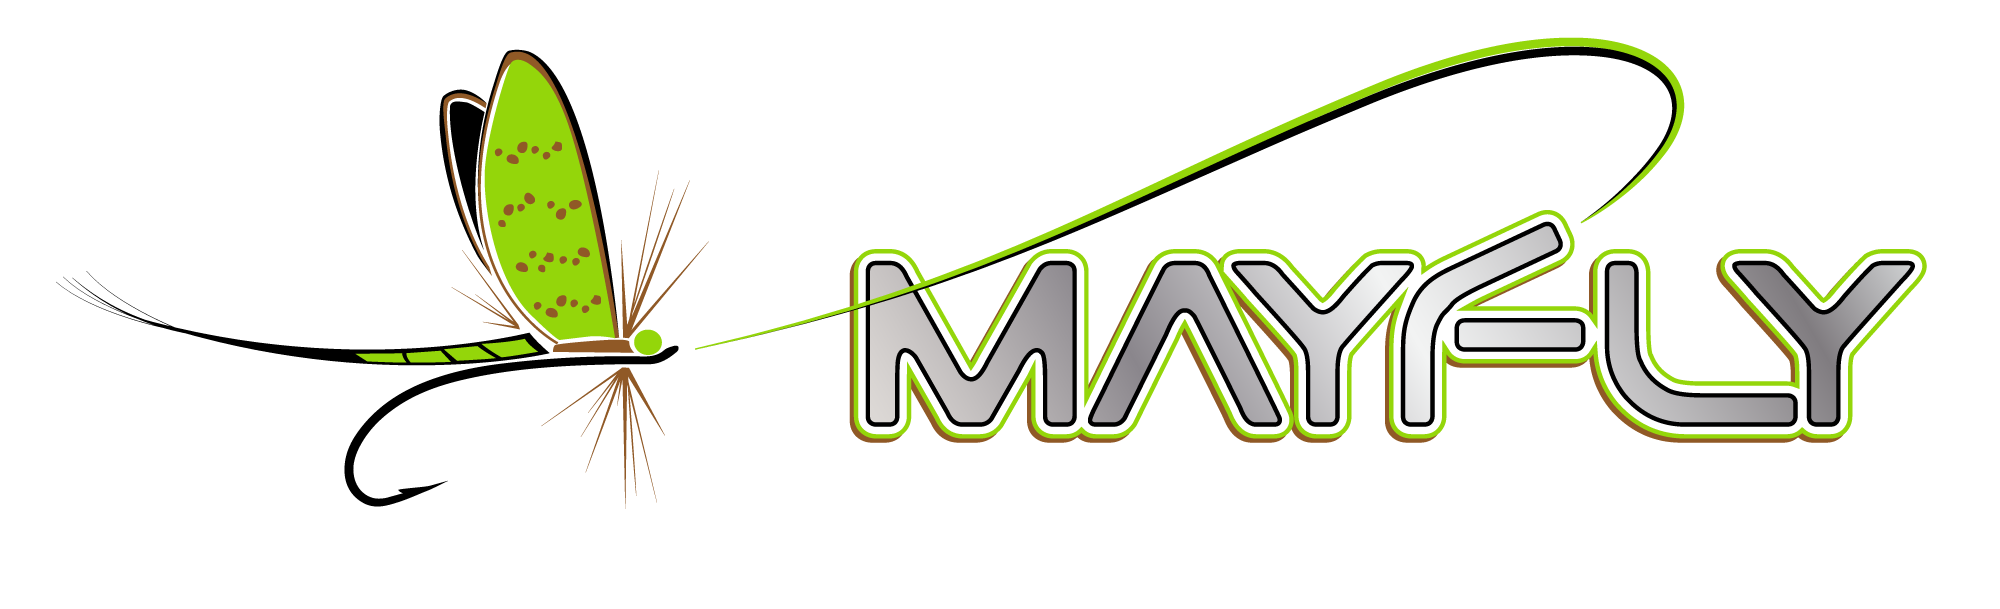 Download PNG image - Mayfly PNG Photos 